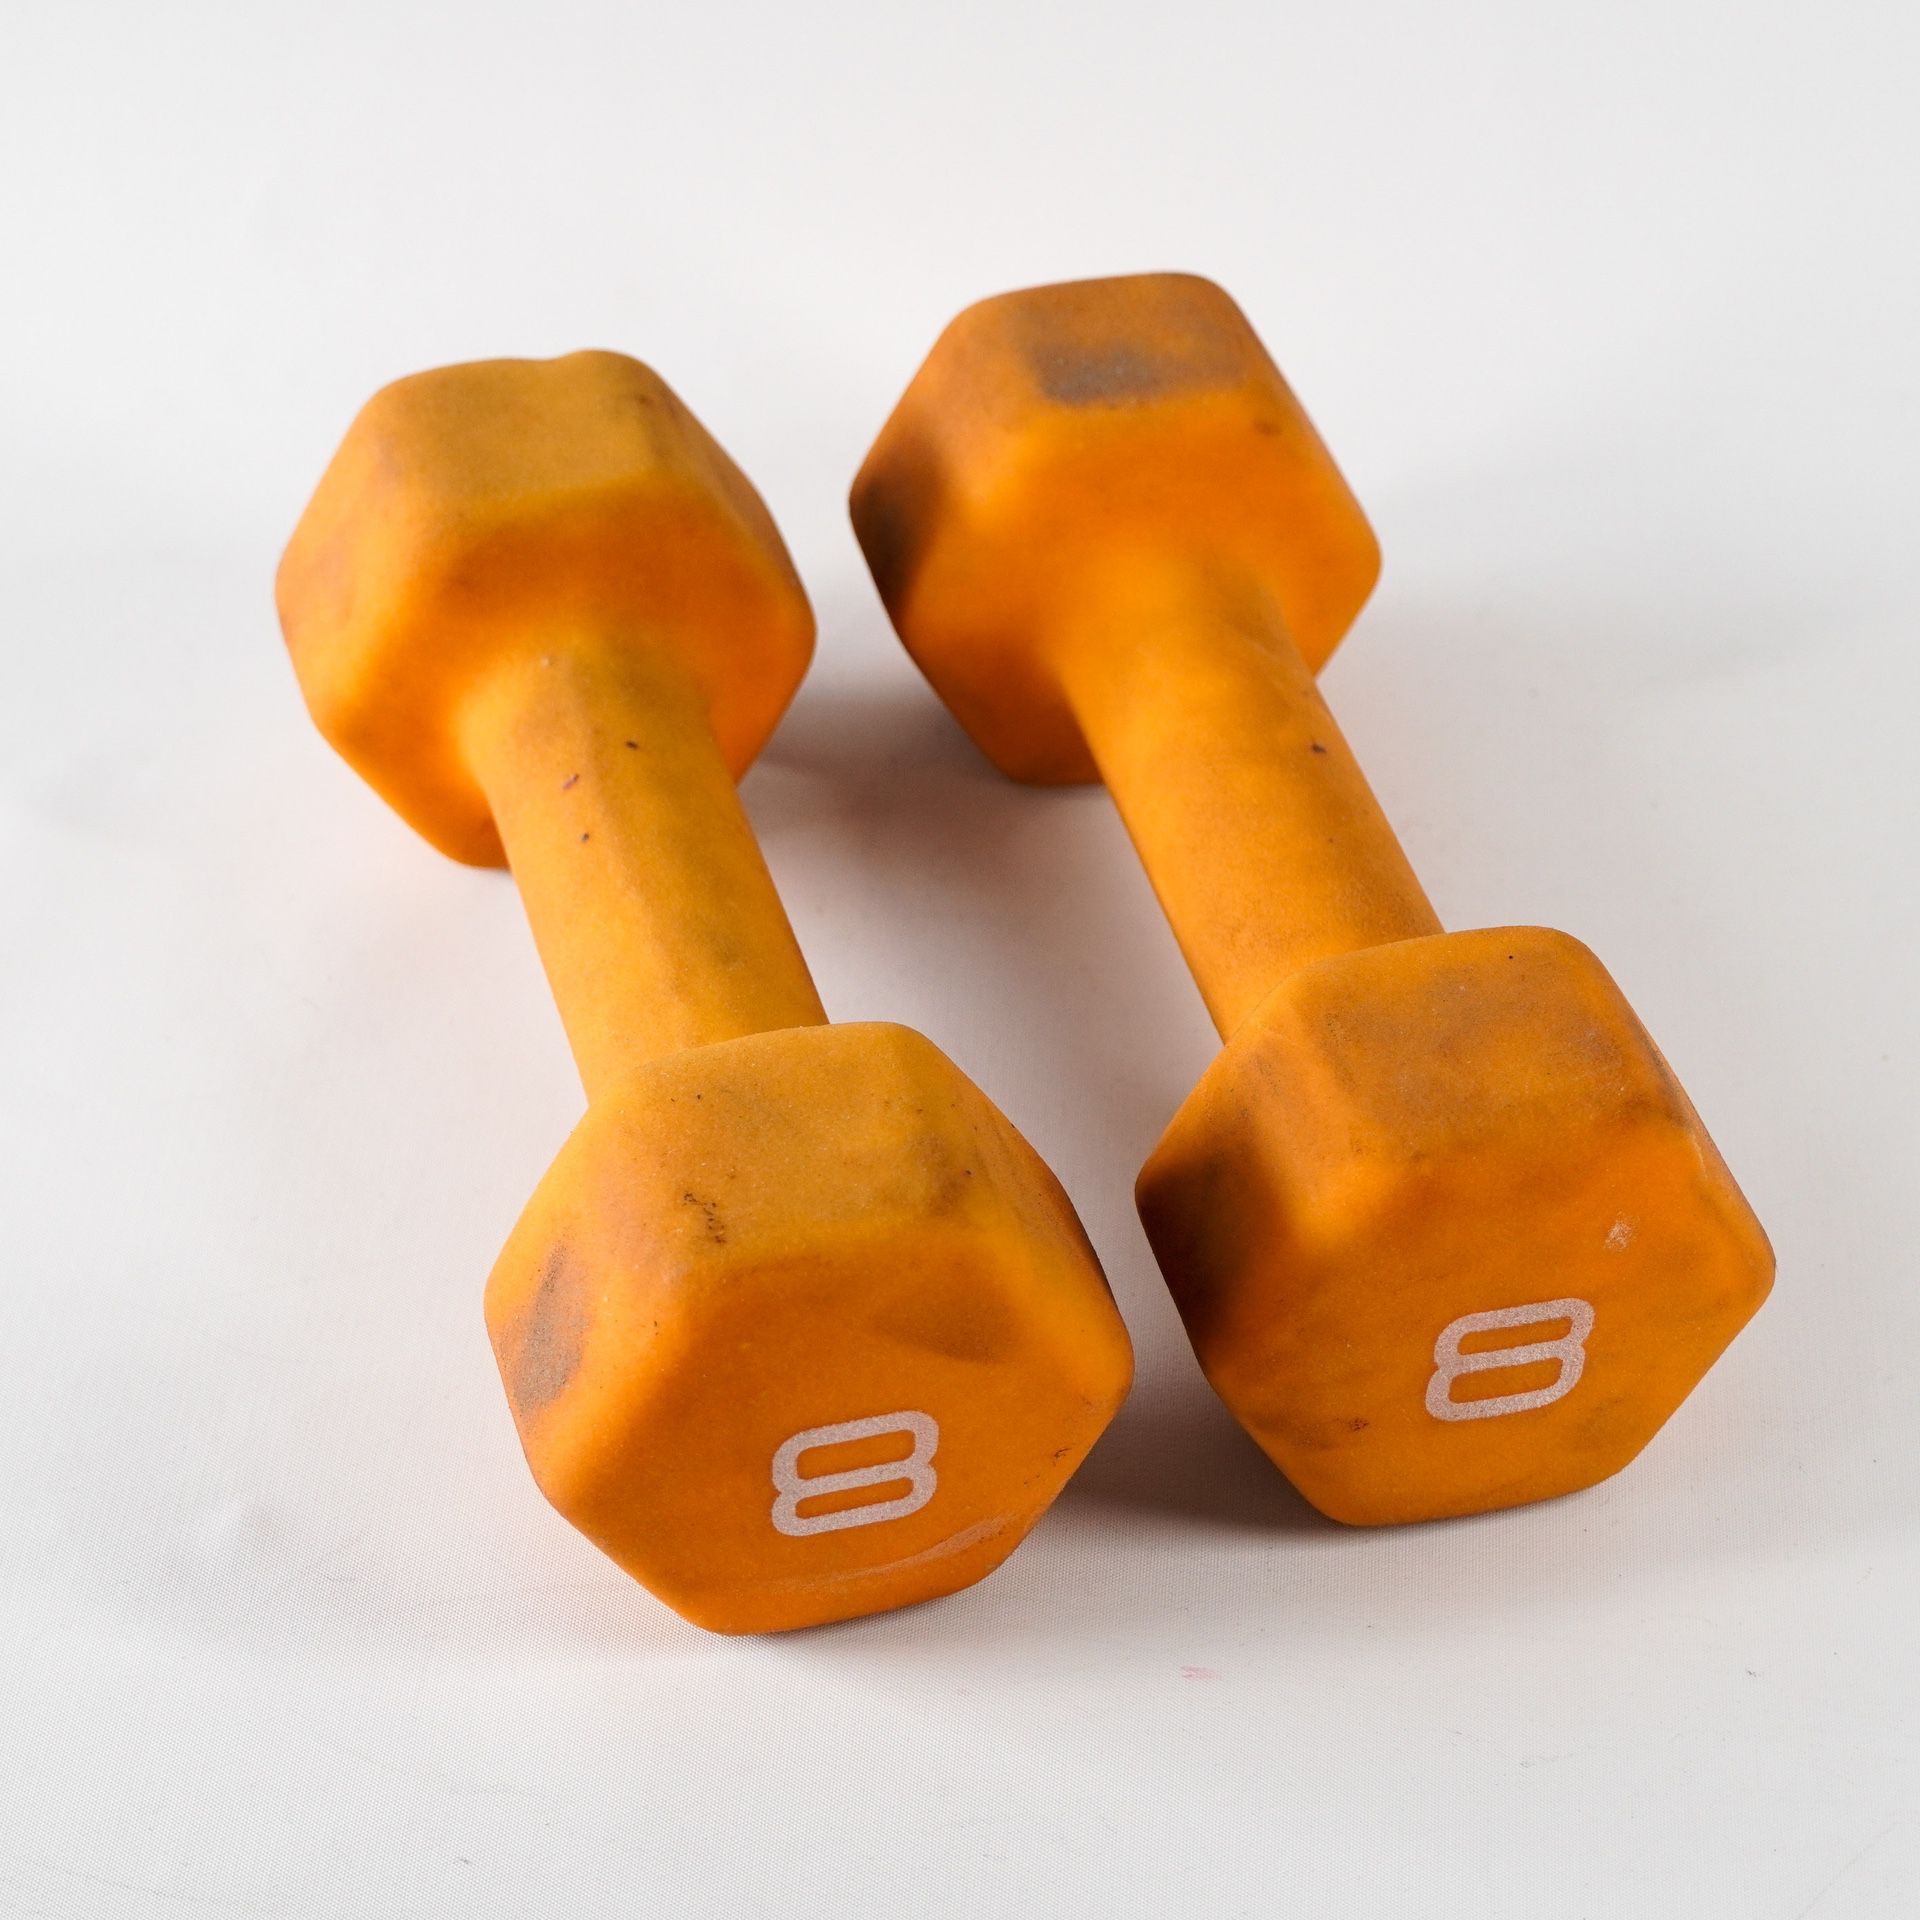 2X 8lb Orange Dumbbell Weights Exercise Equipment Fitness Gym Gear